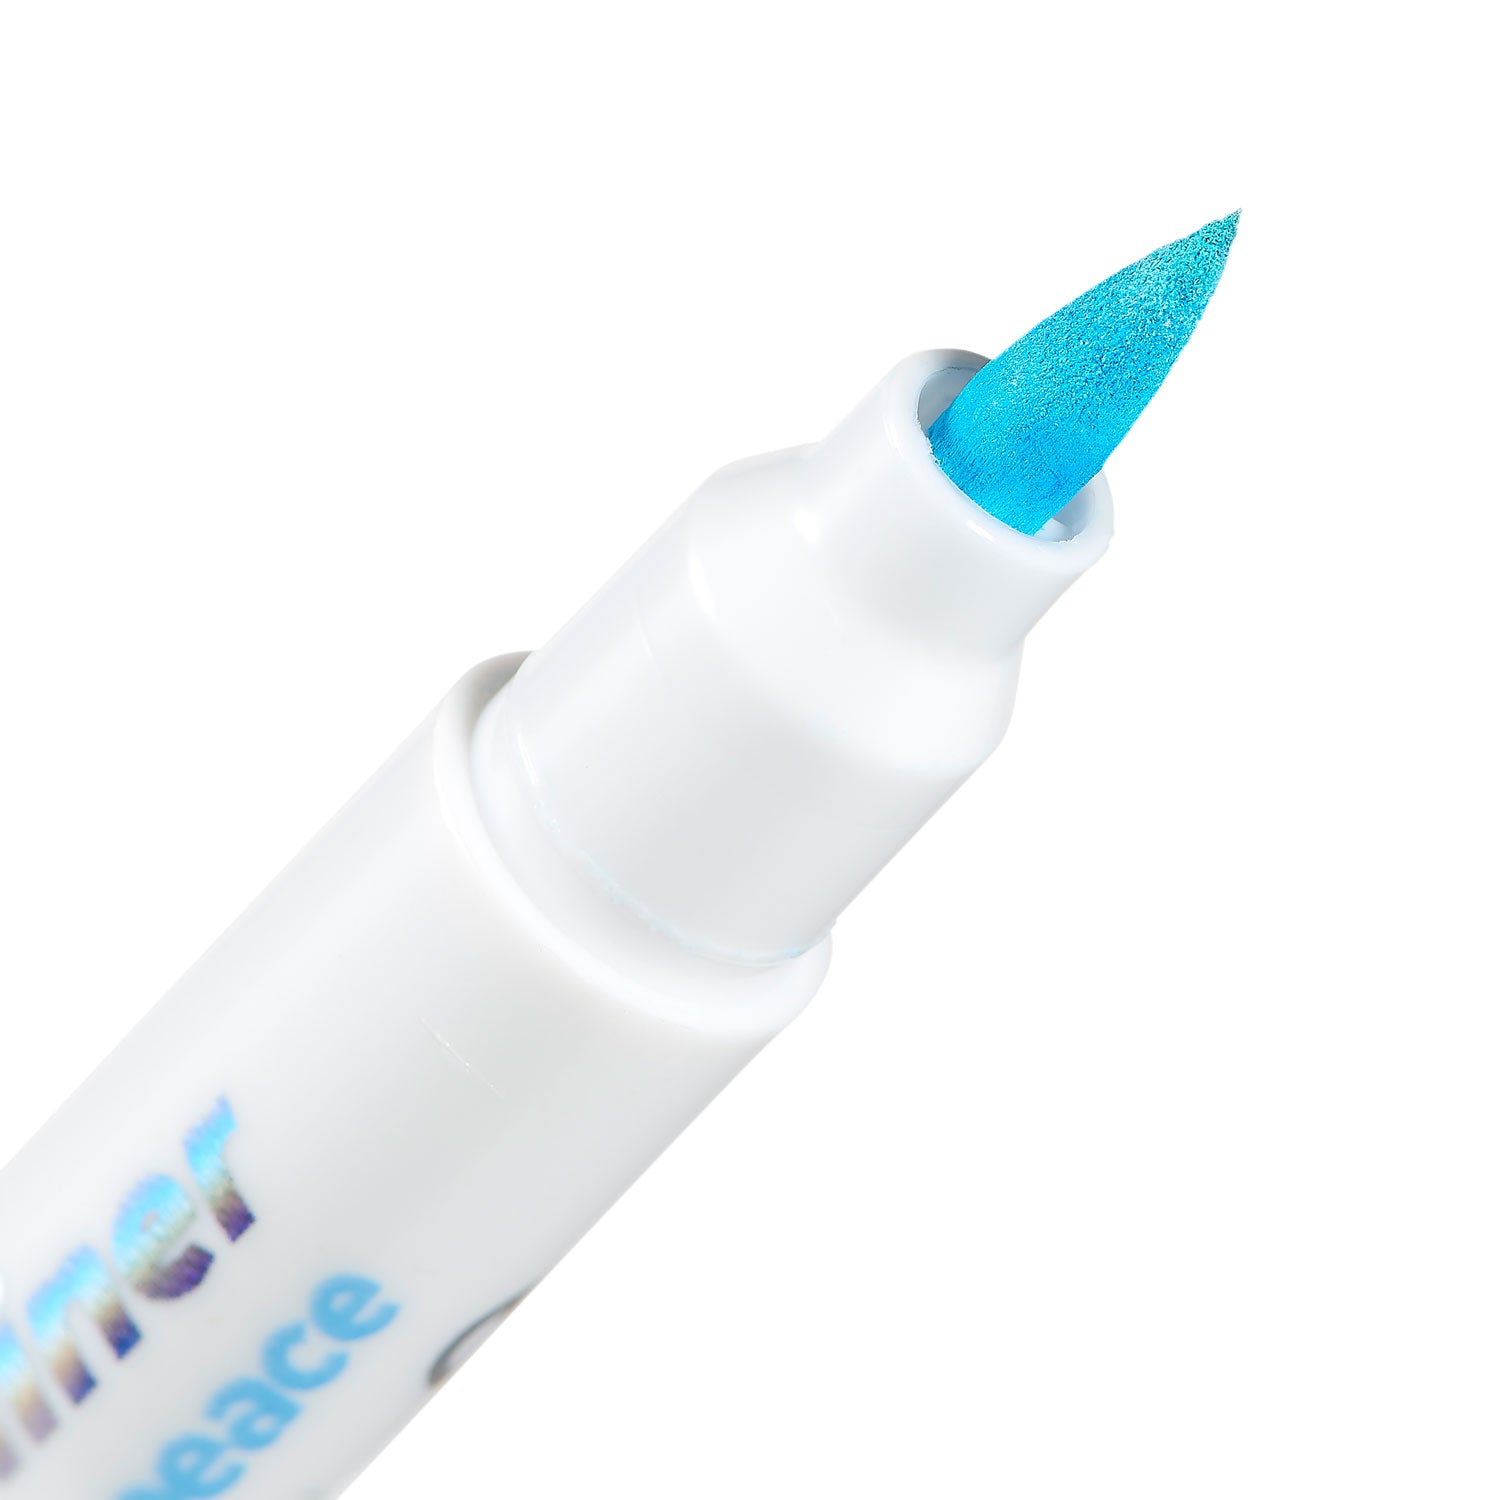 proud to be - blue peace stamp liner